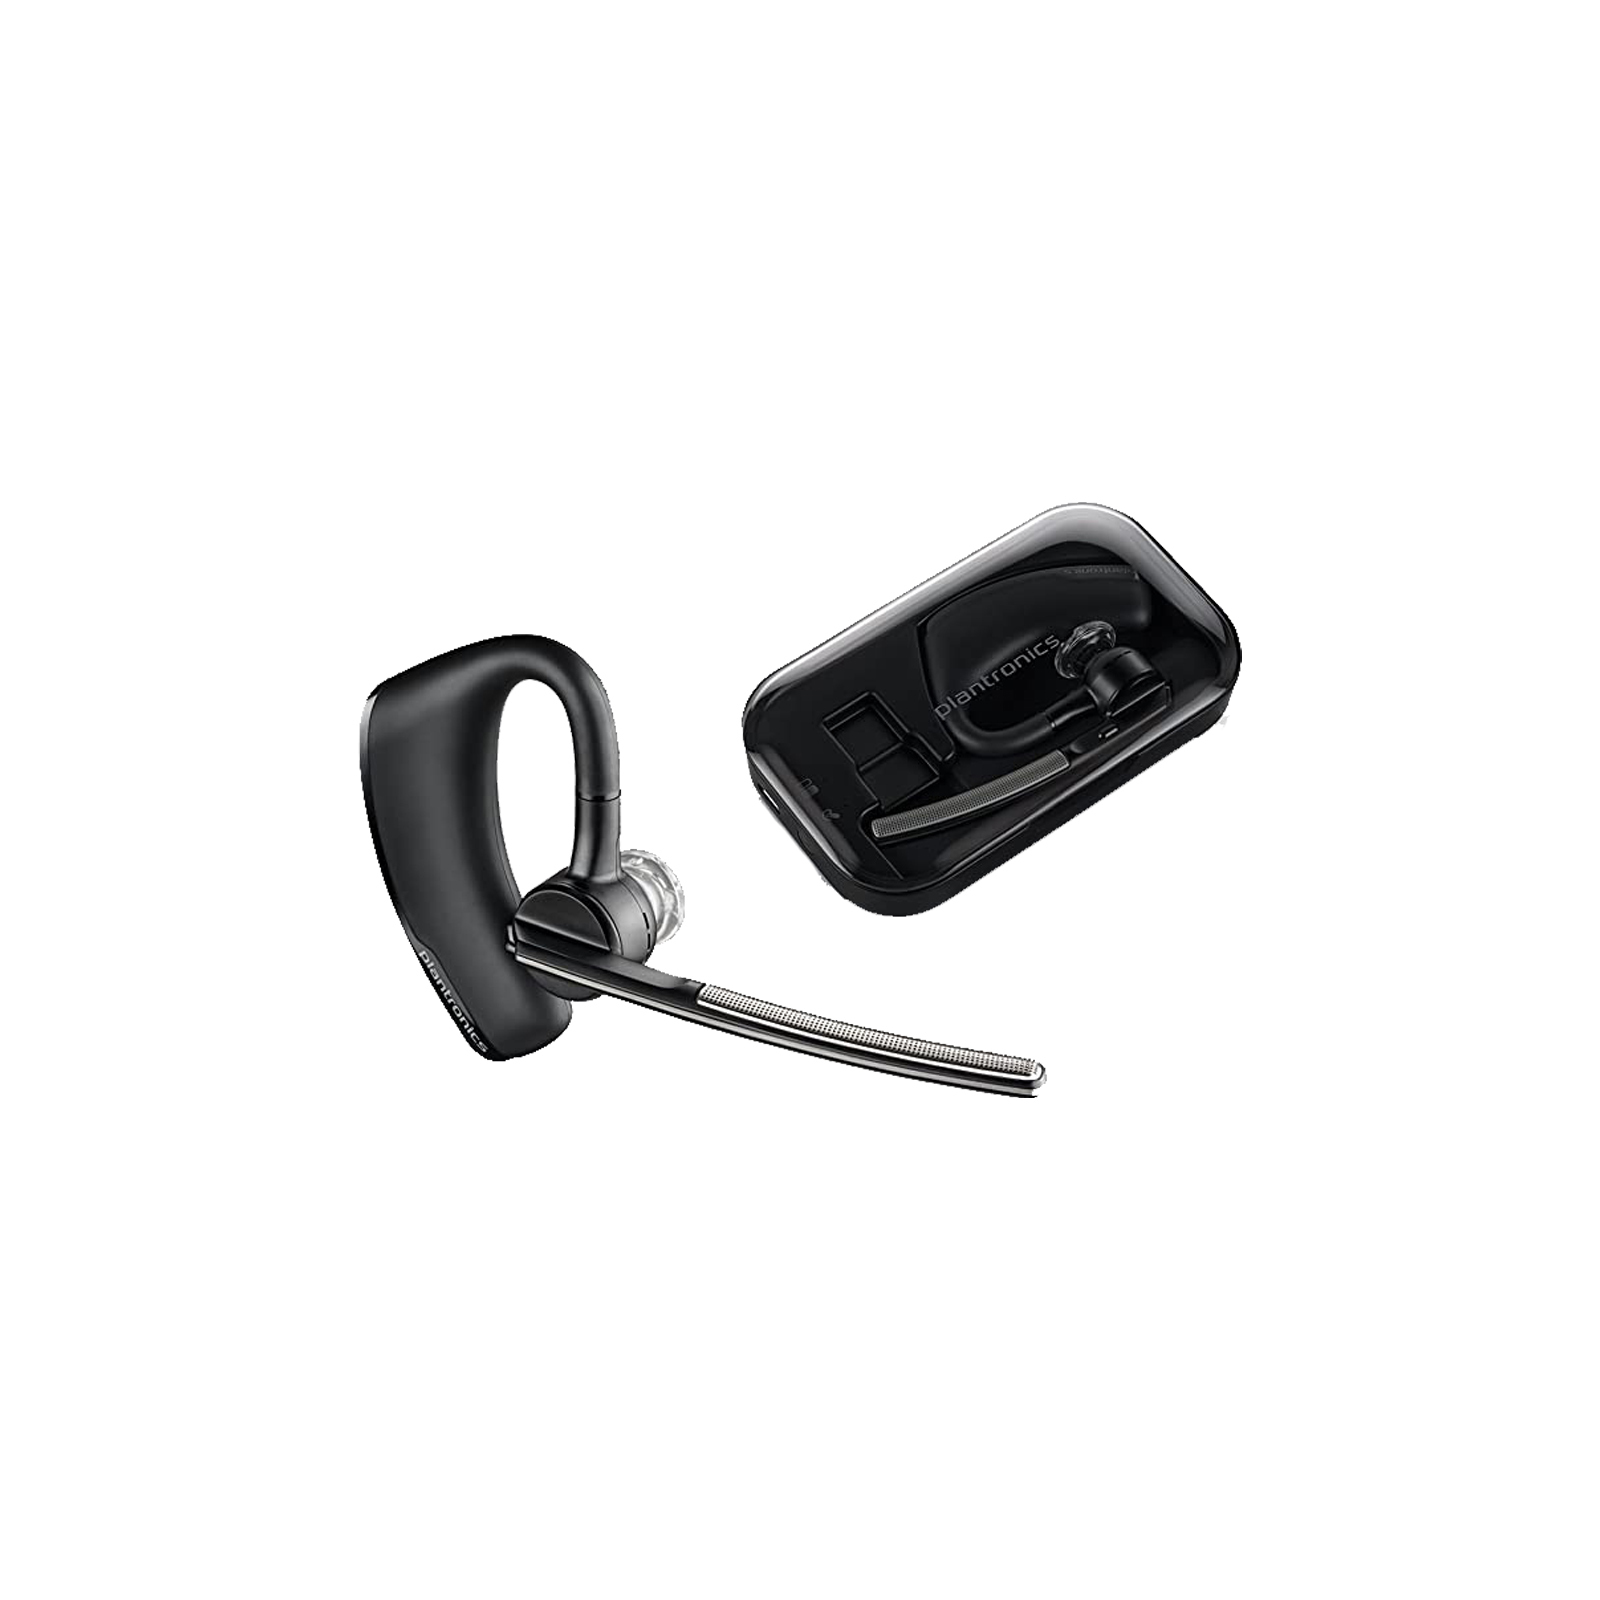 Plantronics Voyager Legend [Bluetooth Headset] [With Case] [Black] [Brand New]